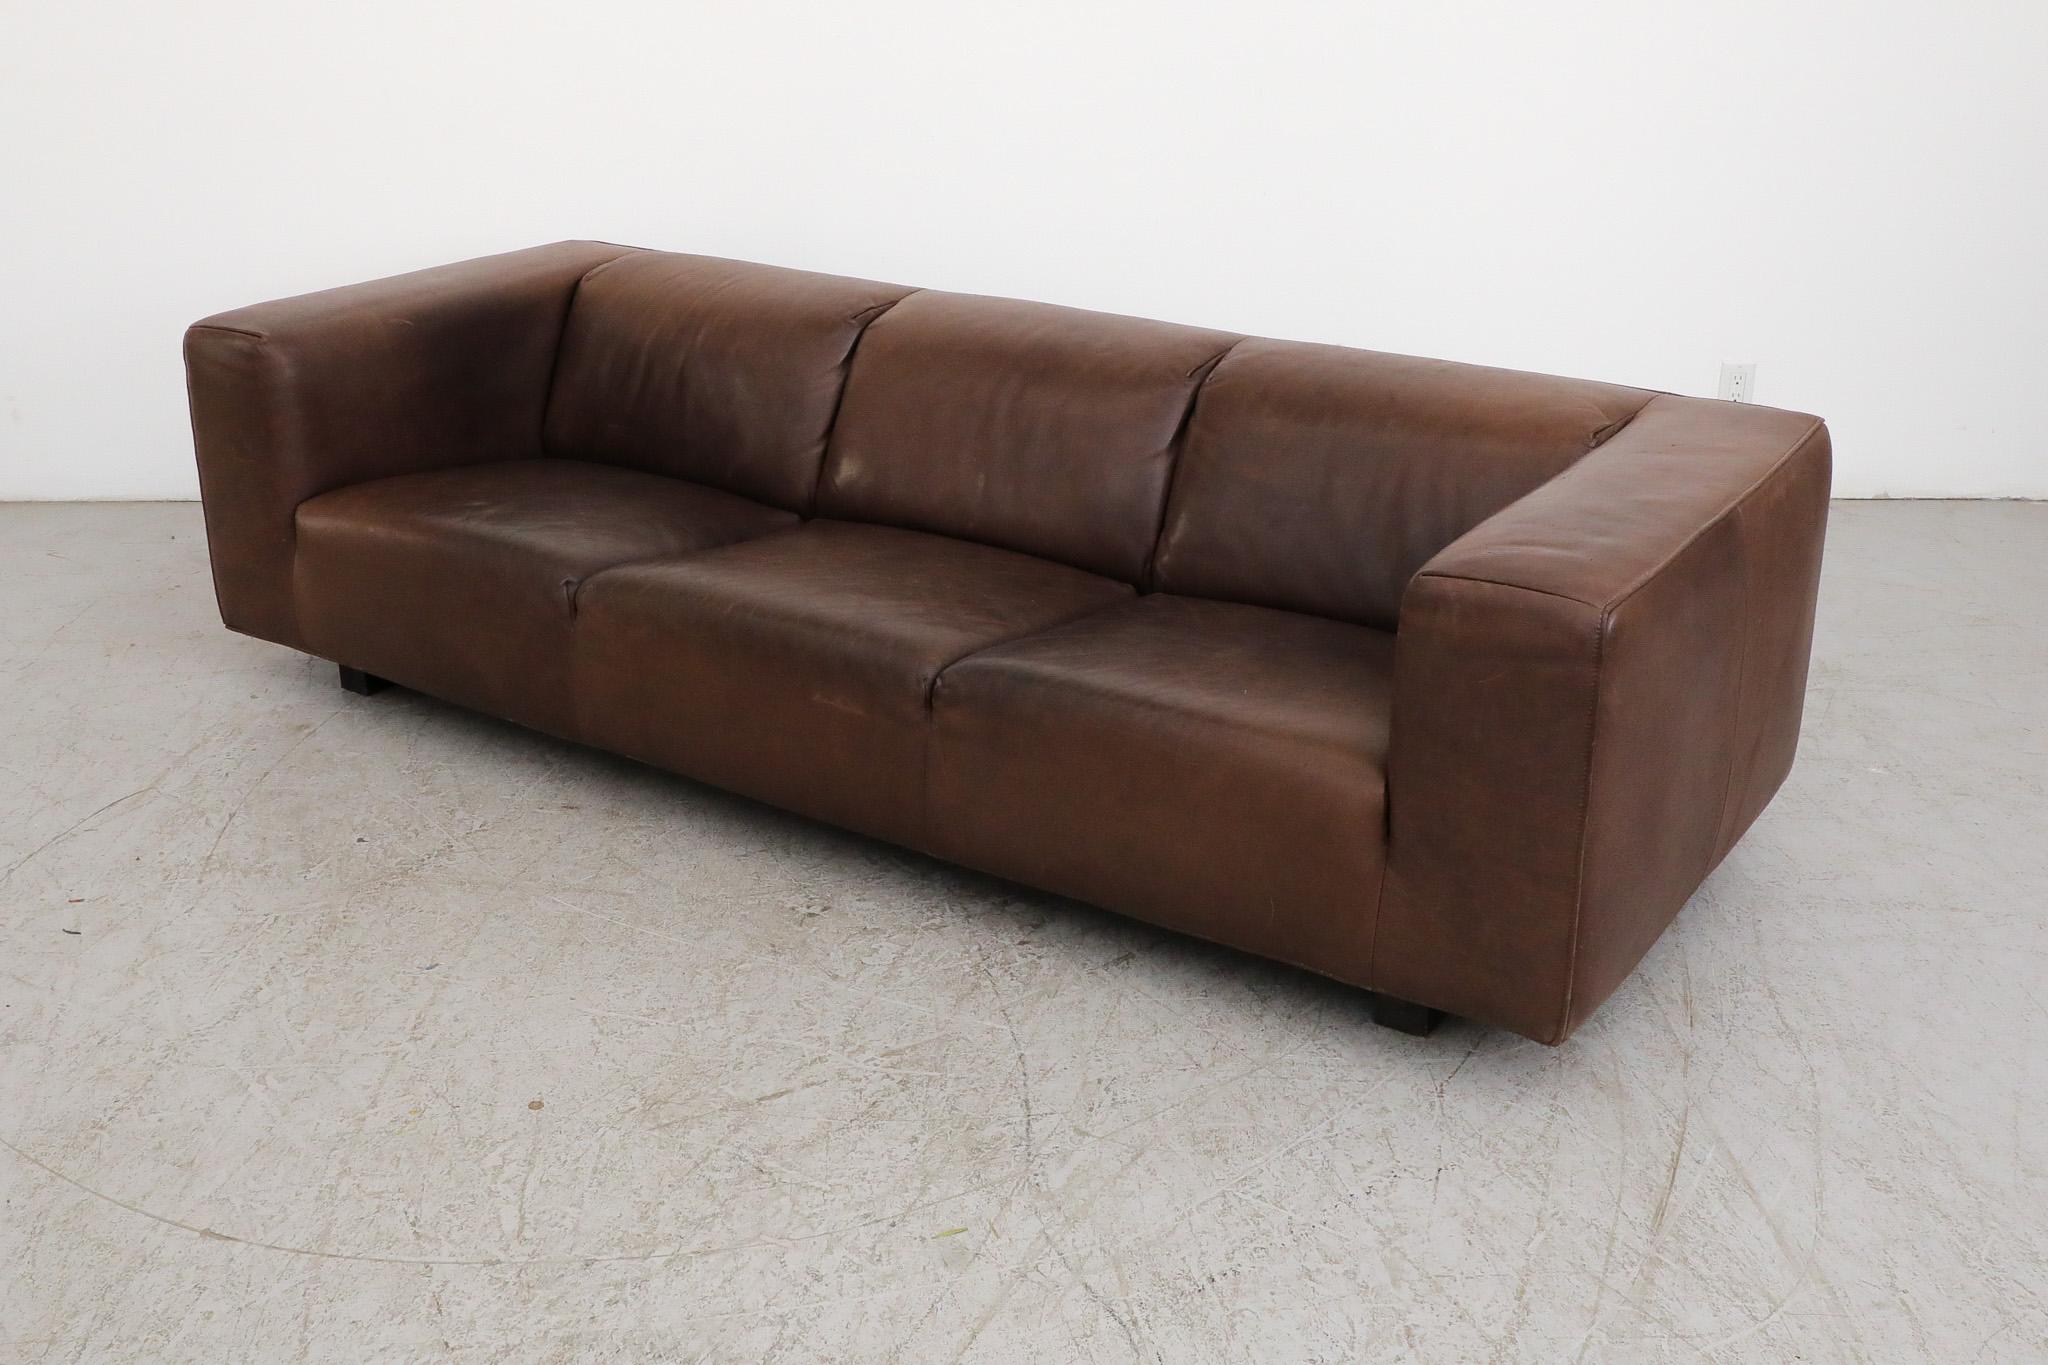 Mid-Century Brown Leather 'Bommel' Sofa by Gerard van den Berg for LABEL, 1985 In Good Condition For Sale In Los Angeles, CA